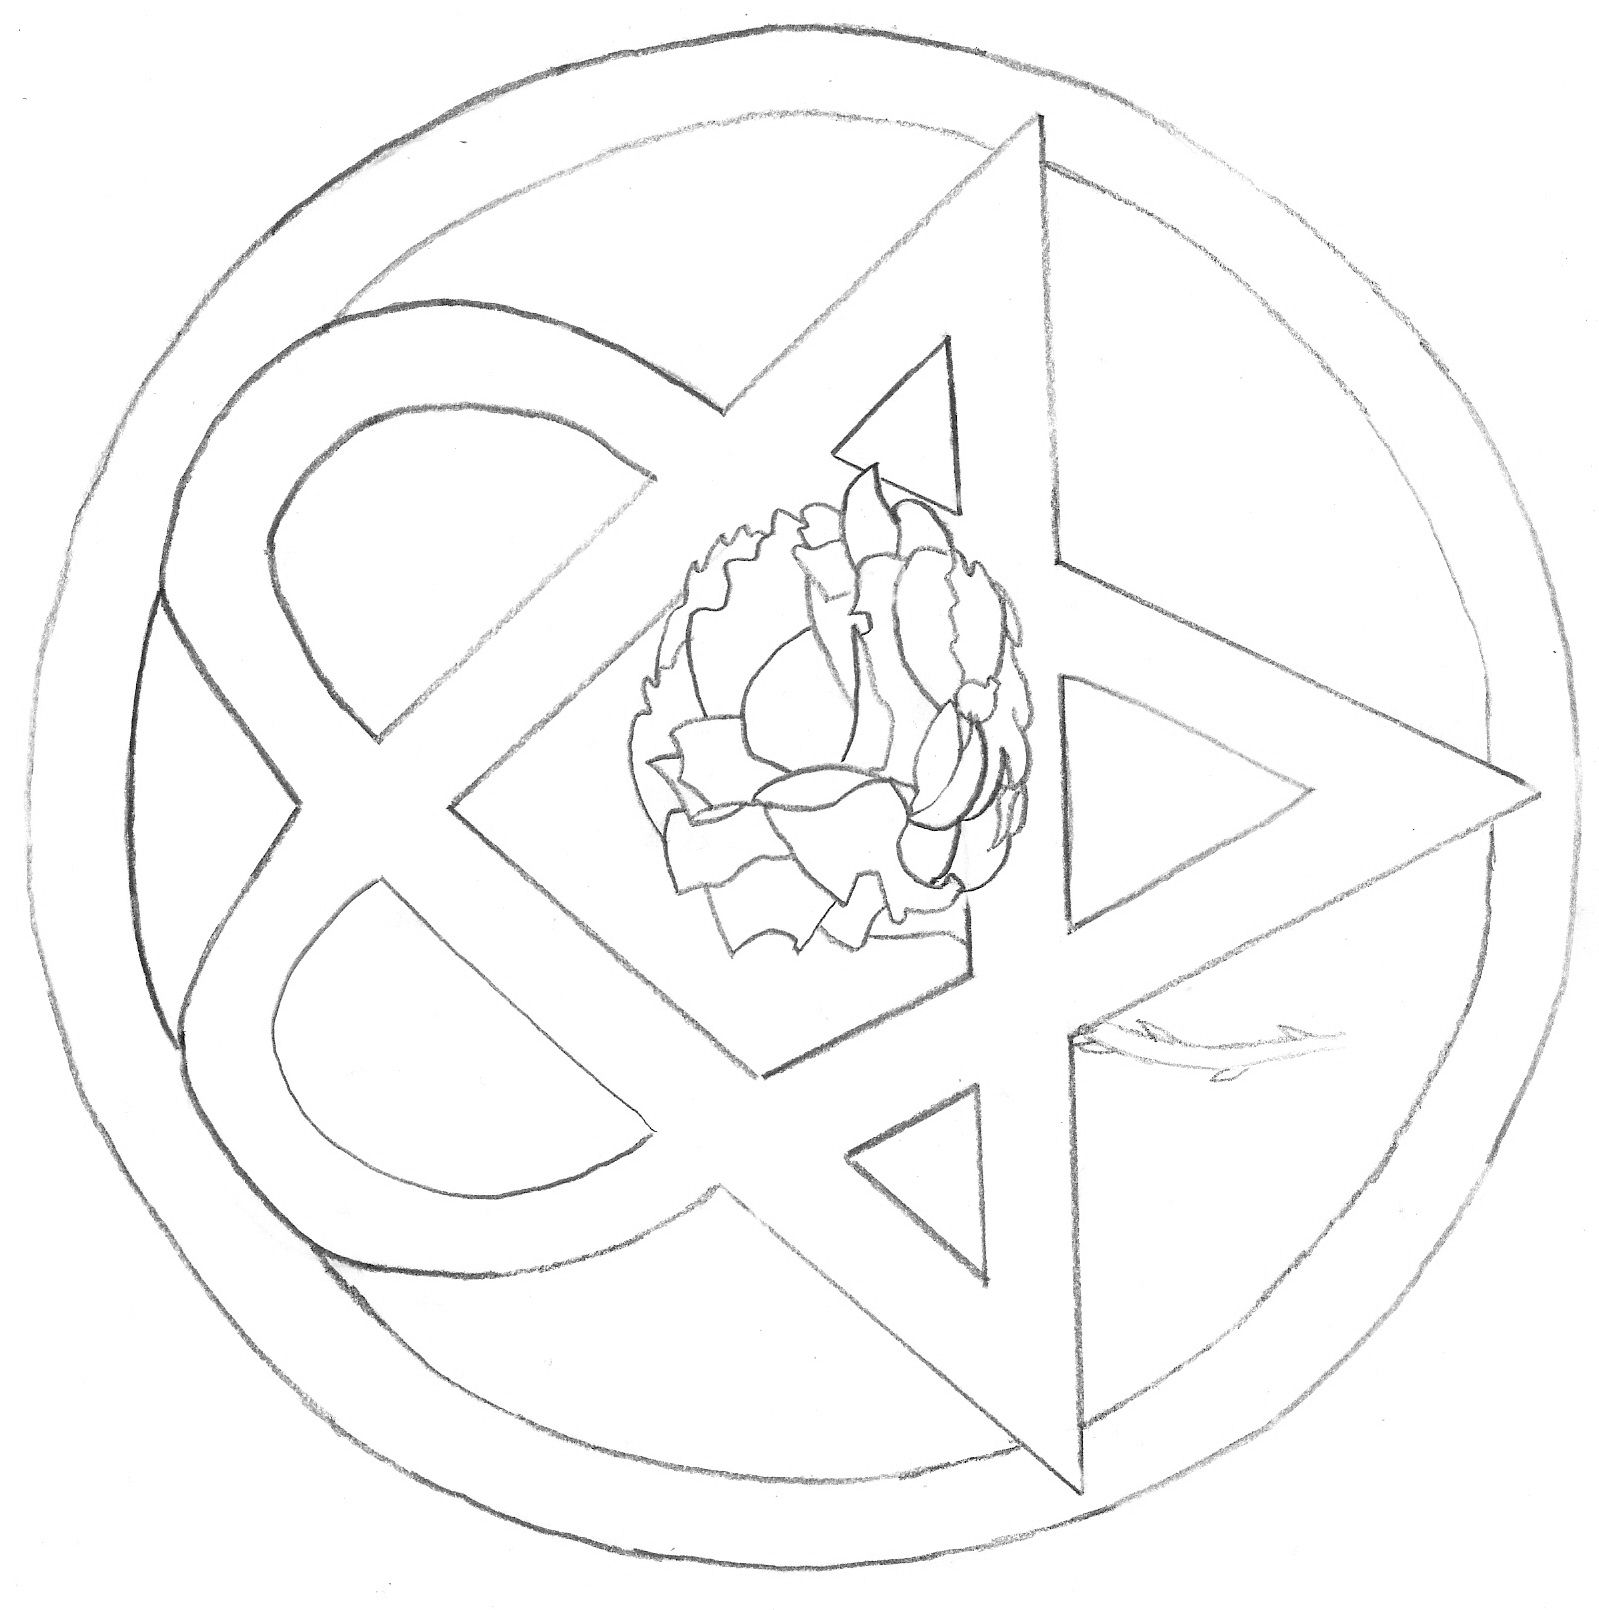 Heartagram With an english rose (unfinished) by wolvesman668